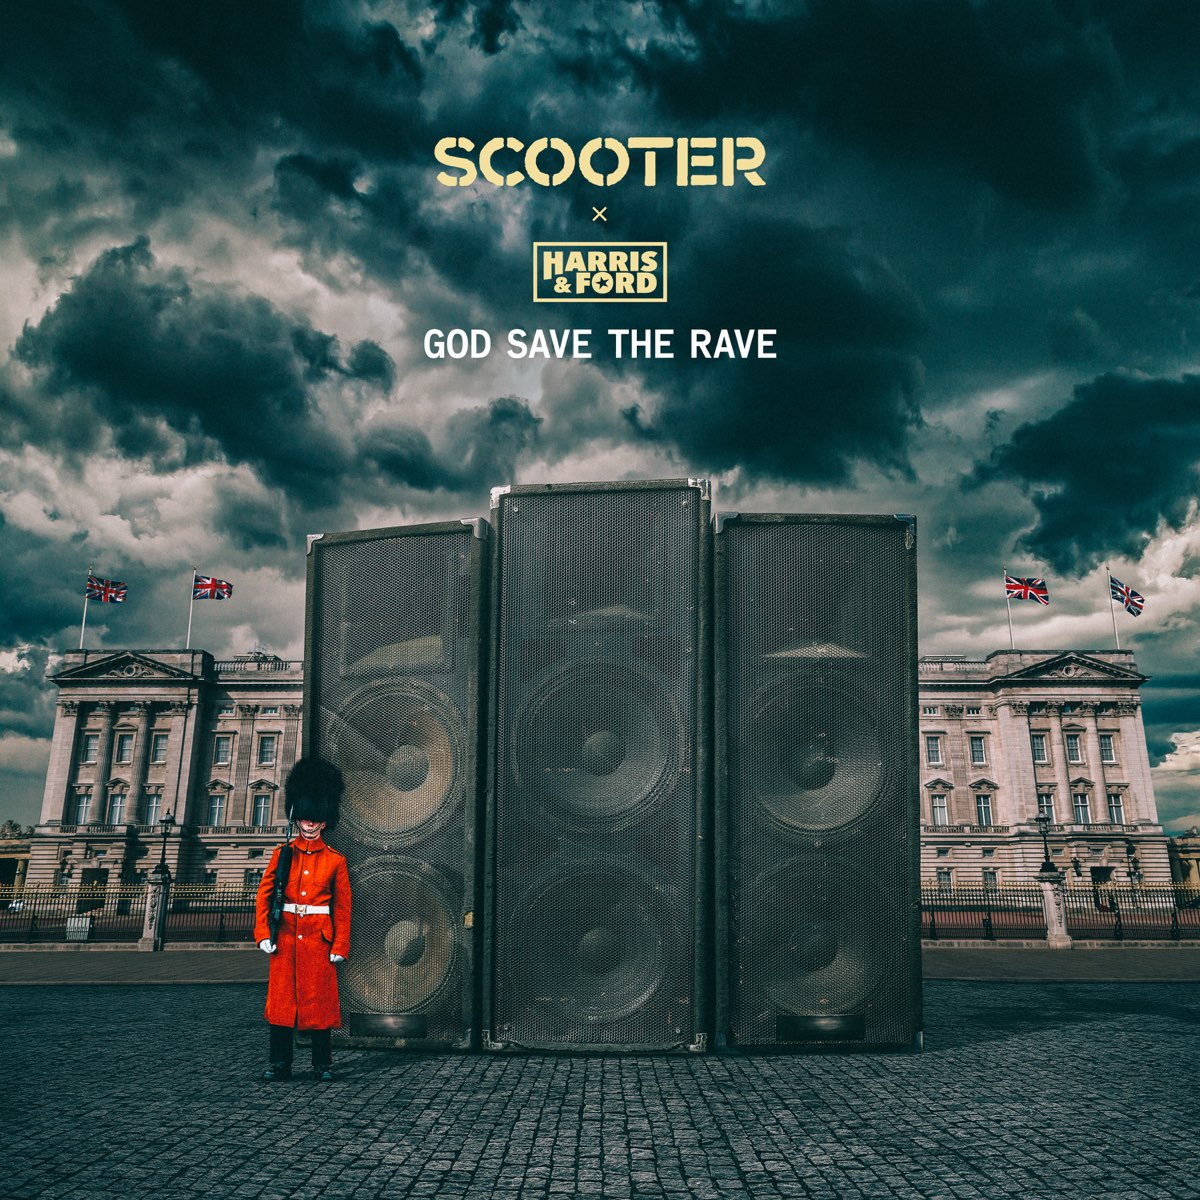 God Save the Rave - Single by Scooter & Harris & Ford on Apple Music